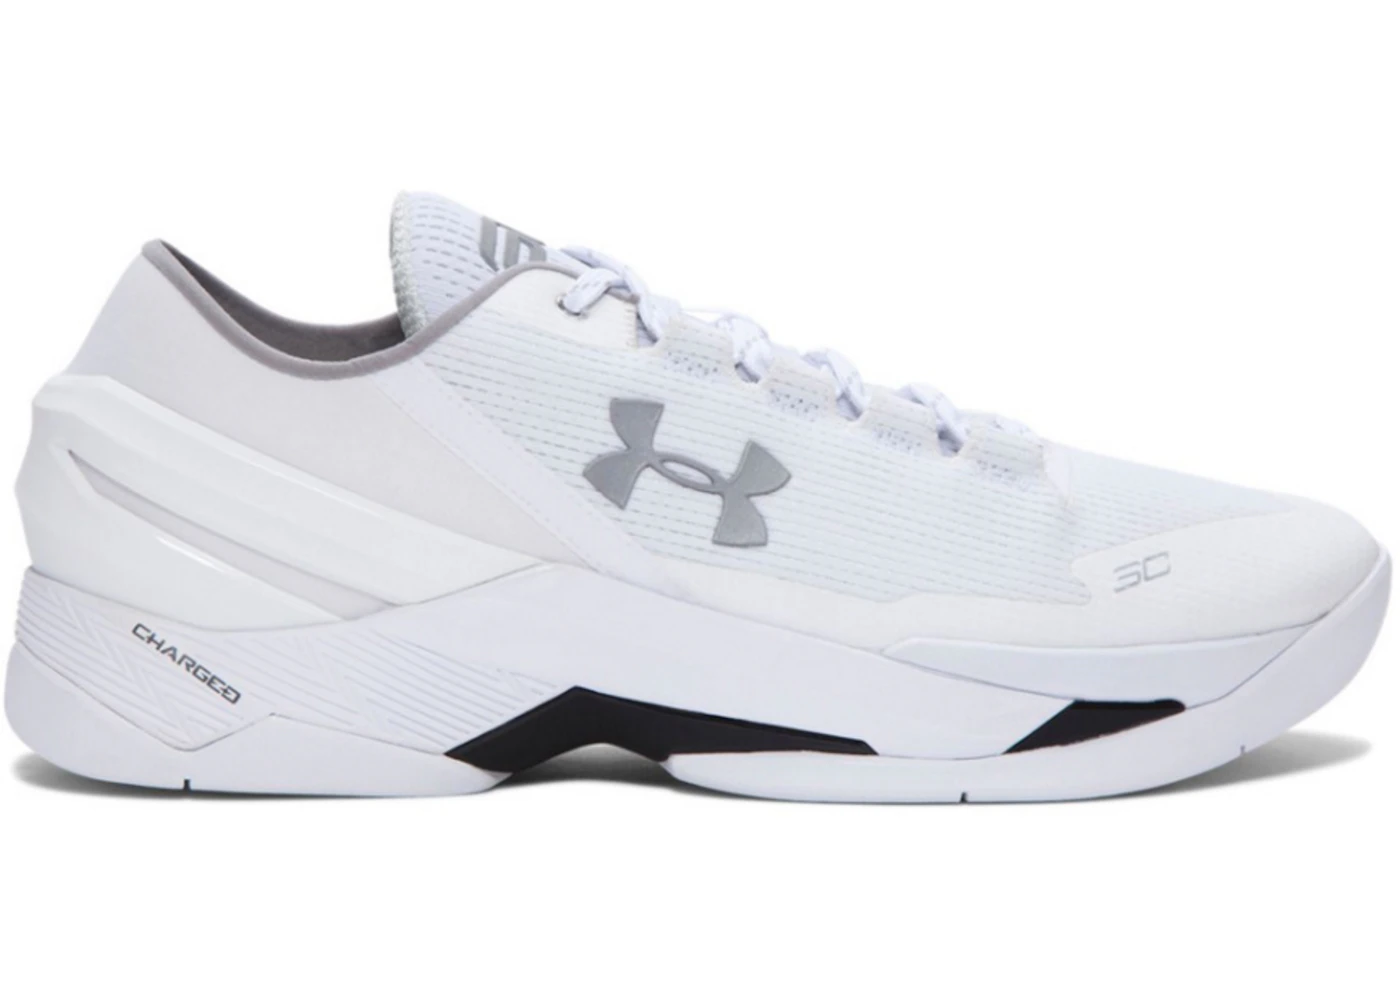 Persona pot staking UA Curry 2 Low Chef Men's - 1264001-103 - US